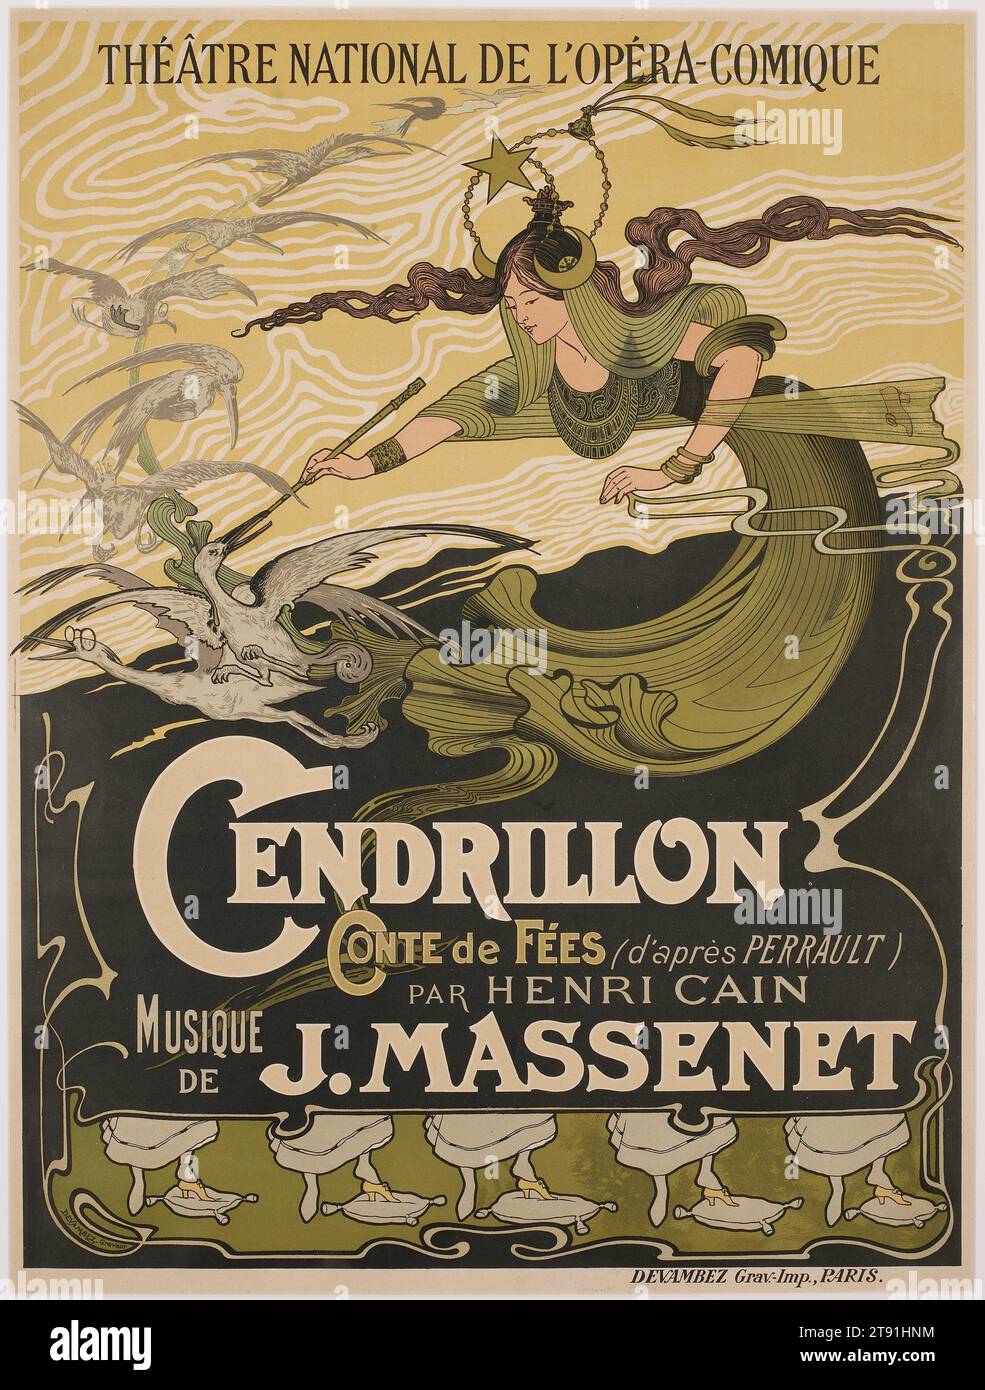 Cendrillon, 1899, Emile Bertrand, French, 31 x 23 1/4 in. (78.74 x 59.06 cm) (sight)37 1/4 x 28 1/4 in. (94.62 x 71.76 cm) (outer frame), Color lithograph, France, 19th century Stock Photo